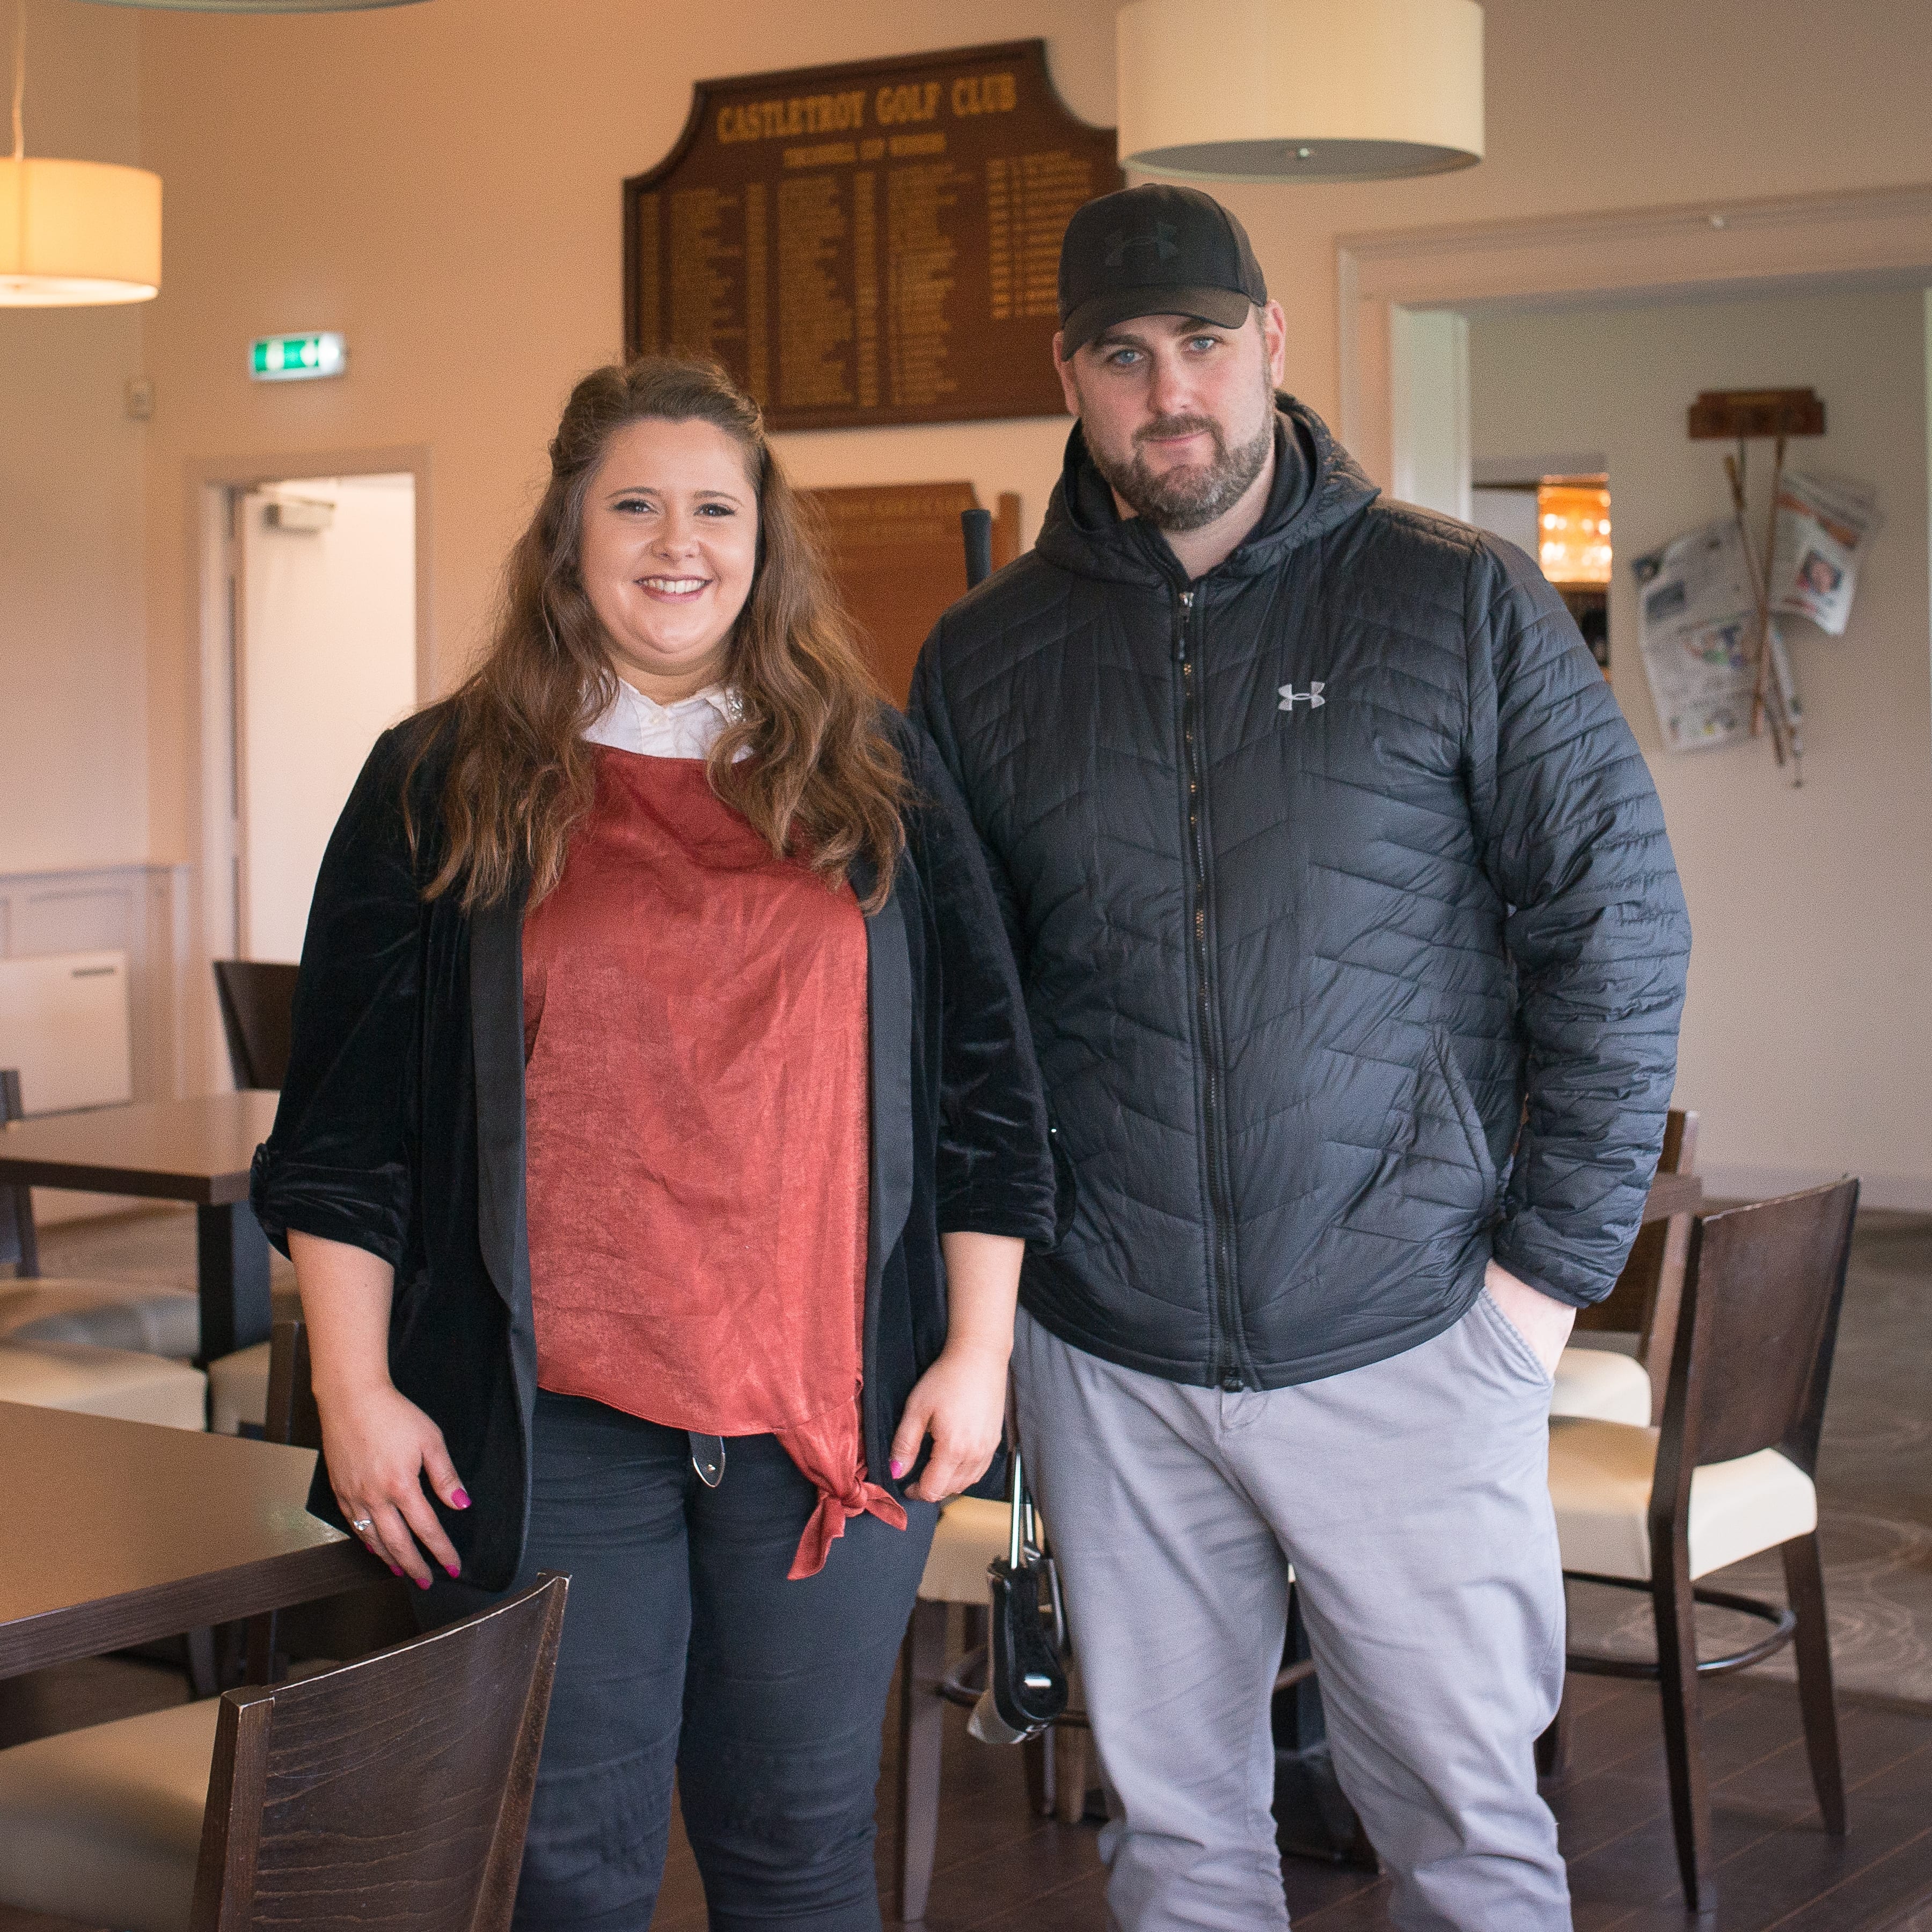 Limerick Chamber Go Golfing for Business Series
in association with the Castletroy Golf Club which took place in the Castletroy Golf Club  on Thursday 7th March 2019:  From left to right: Caoimhe Moloney - Limerick Chamber, Stephen Collopy - Action Point. 
Image by Morning Star Photography